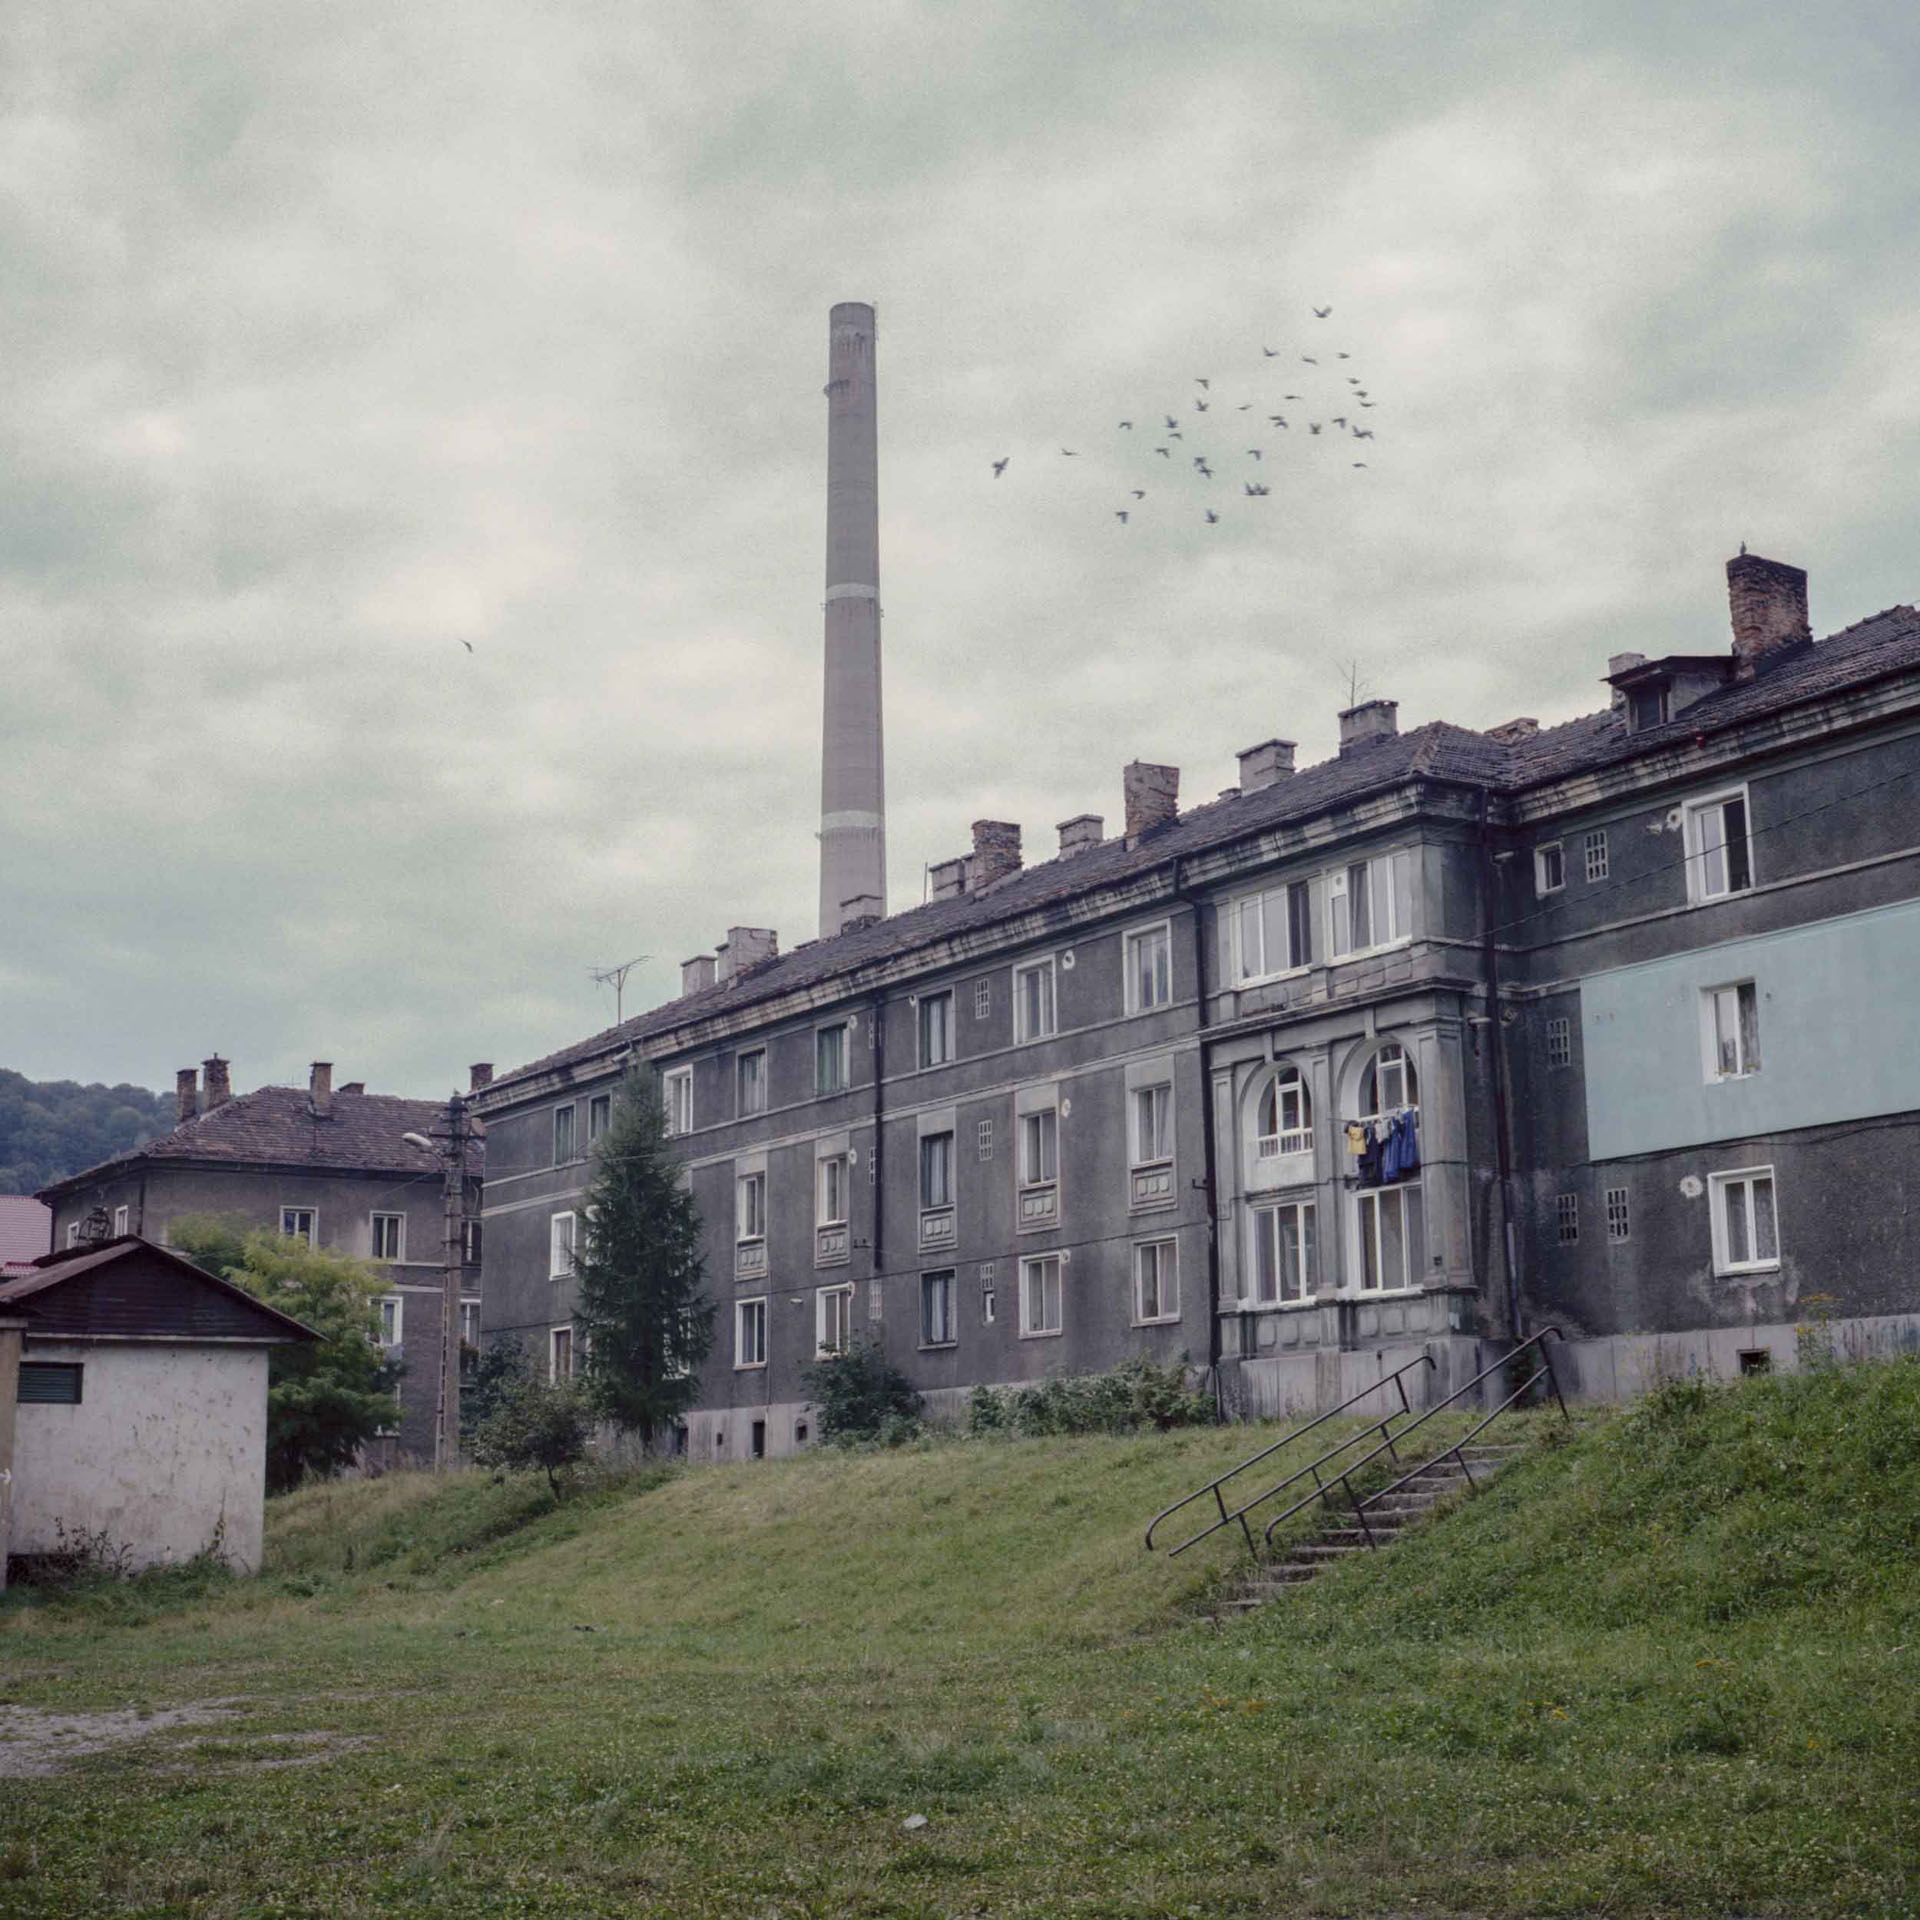 From Post-Industrial Stories by Ioana Cîrlig